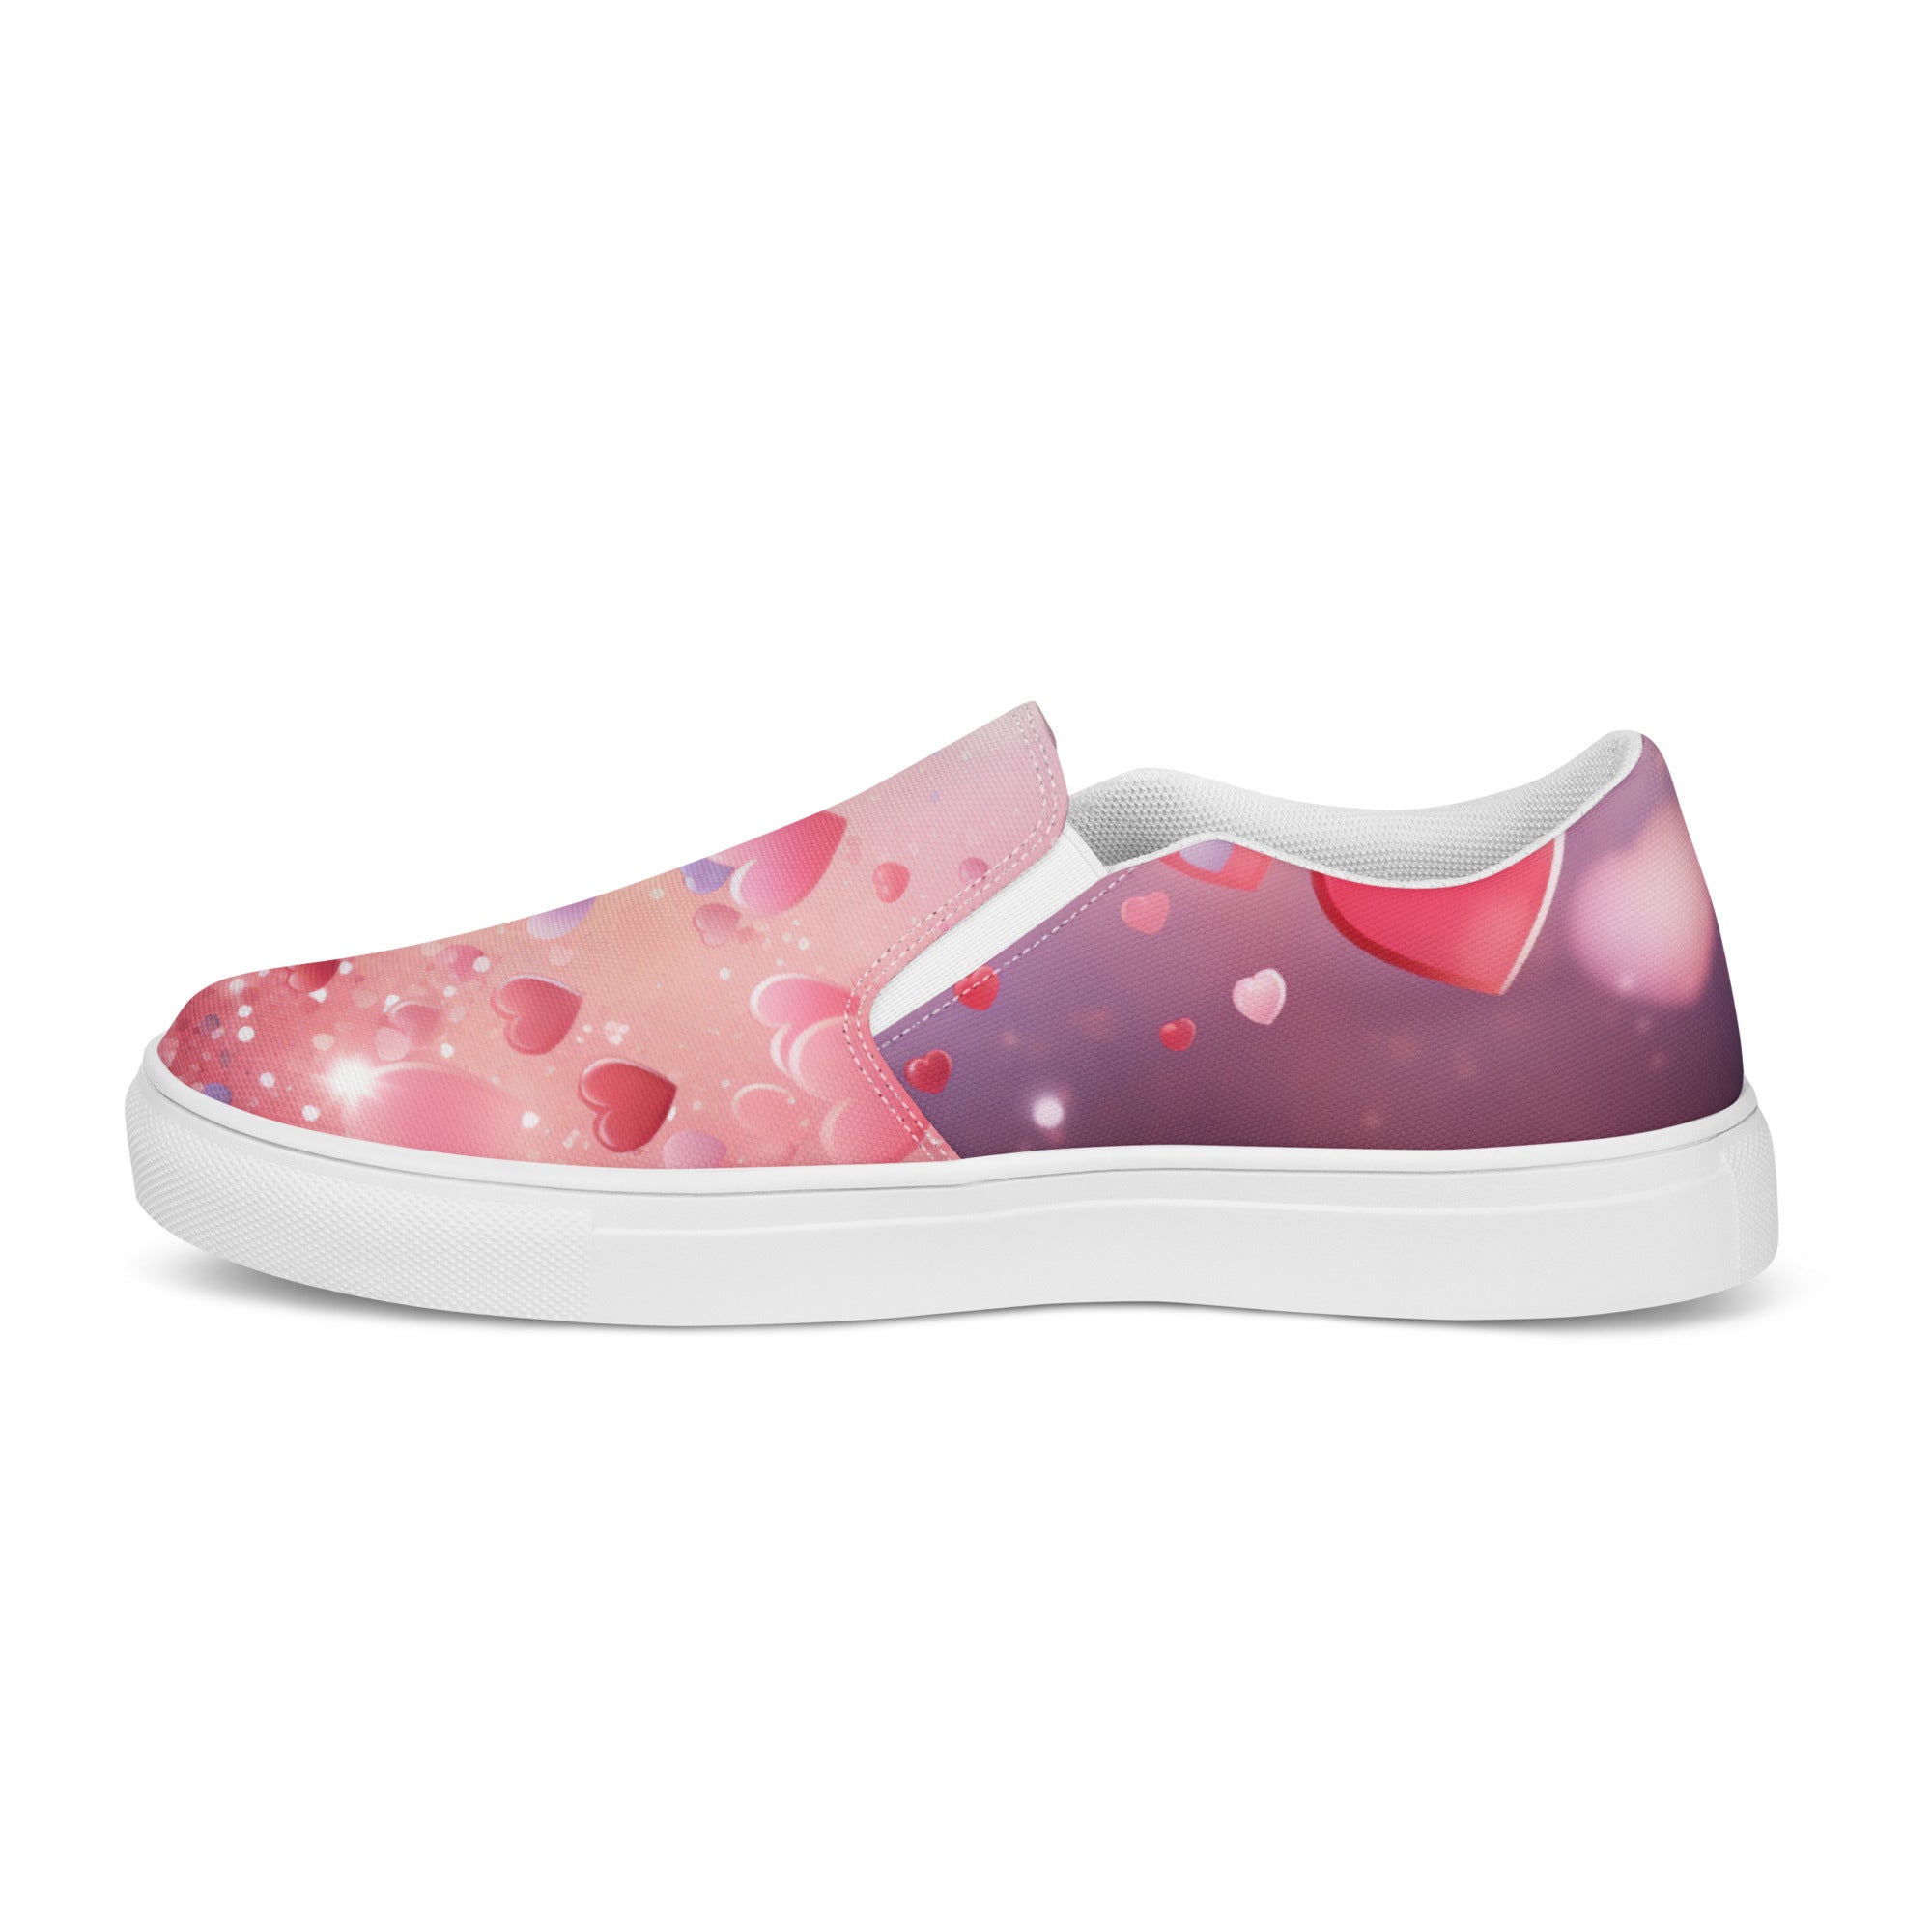 Enchanted Heart Slip-Ons: Fairy-Tale Canvas Shoes for Her - The Perfect Gift for Love & Celebration | Fairy Shoes